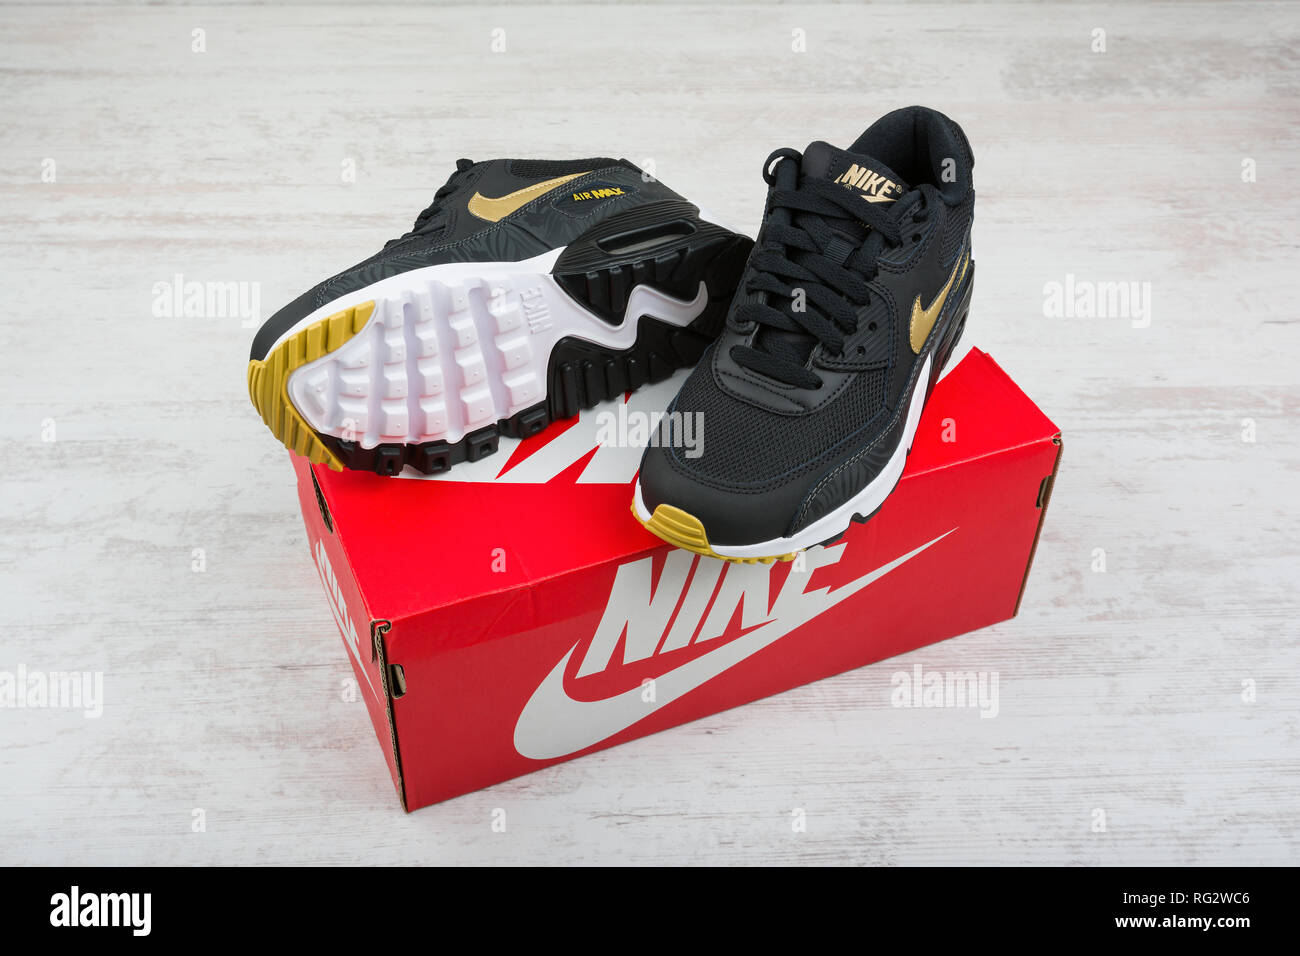 BURGAS, BULGARIA - DECEMBER 30, 2016: Nike Air MAX women's shoes - sneakers  in black, on white wooden background. Nike is a global sports clothes and  Stock Photo - Alamy